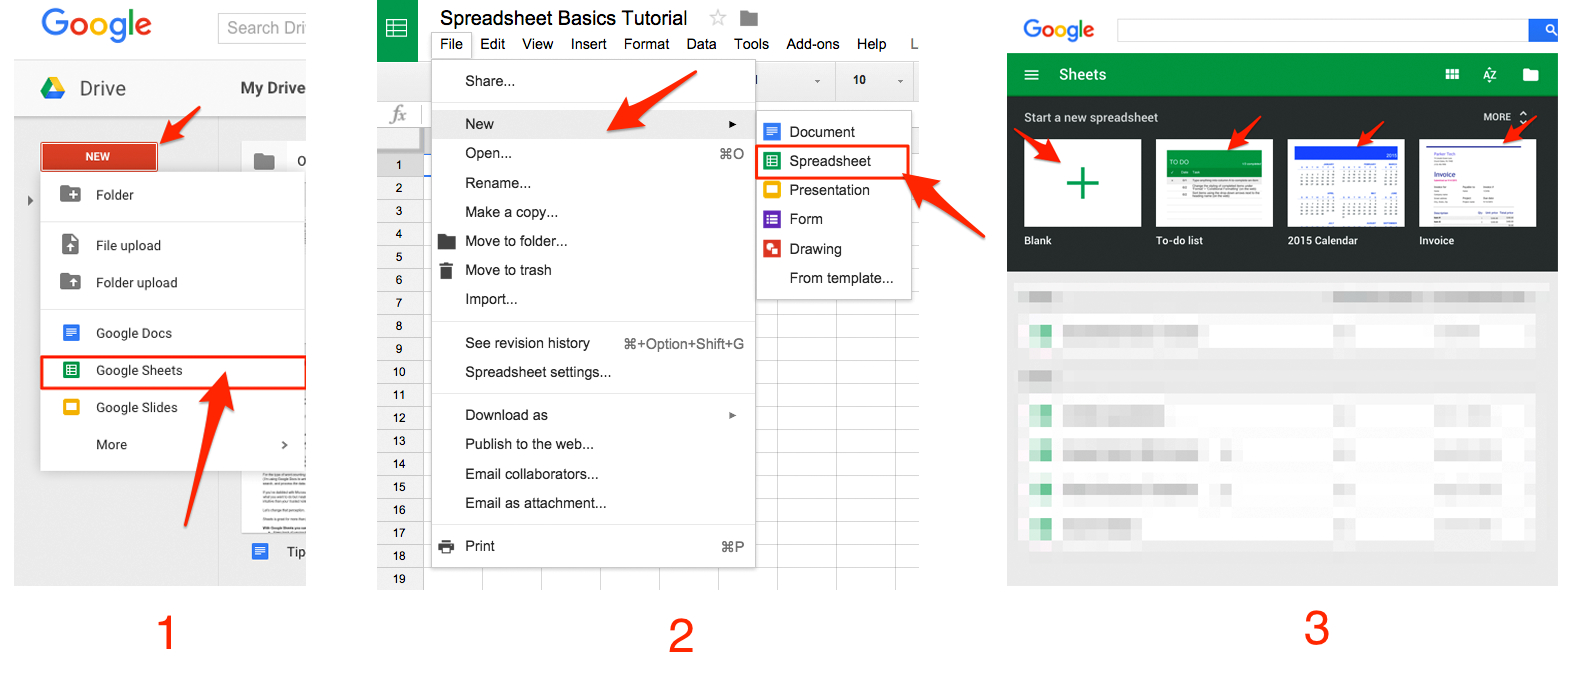 How To Use Spreadsheets For Dummies inside Google Sheets 101: The Beginner's Guide To Online Spreadsheets  The